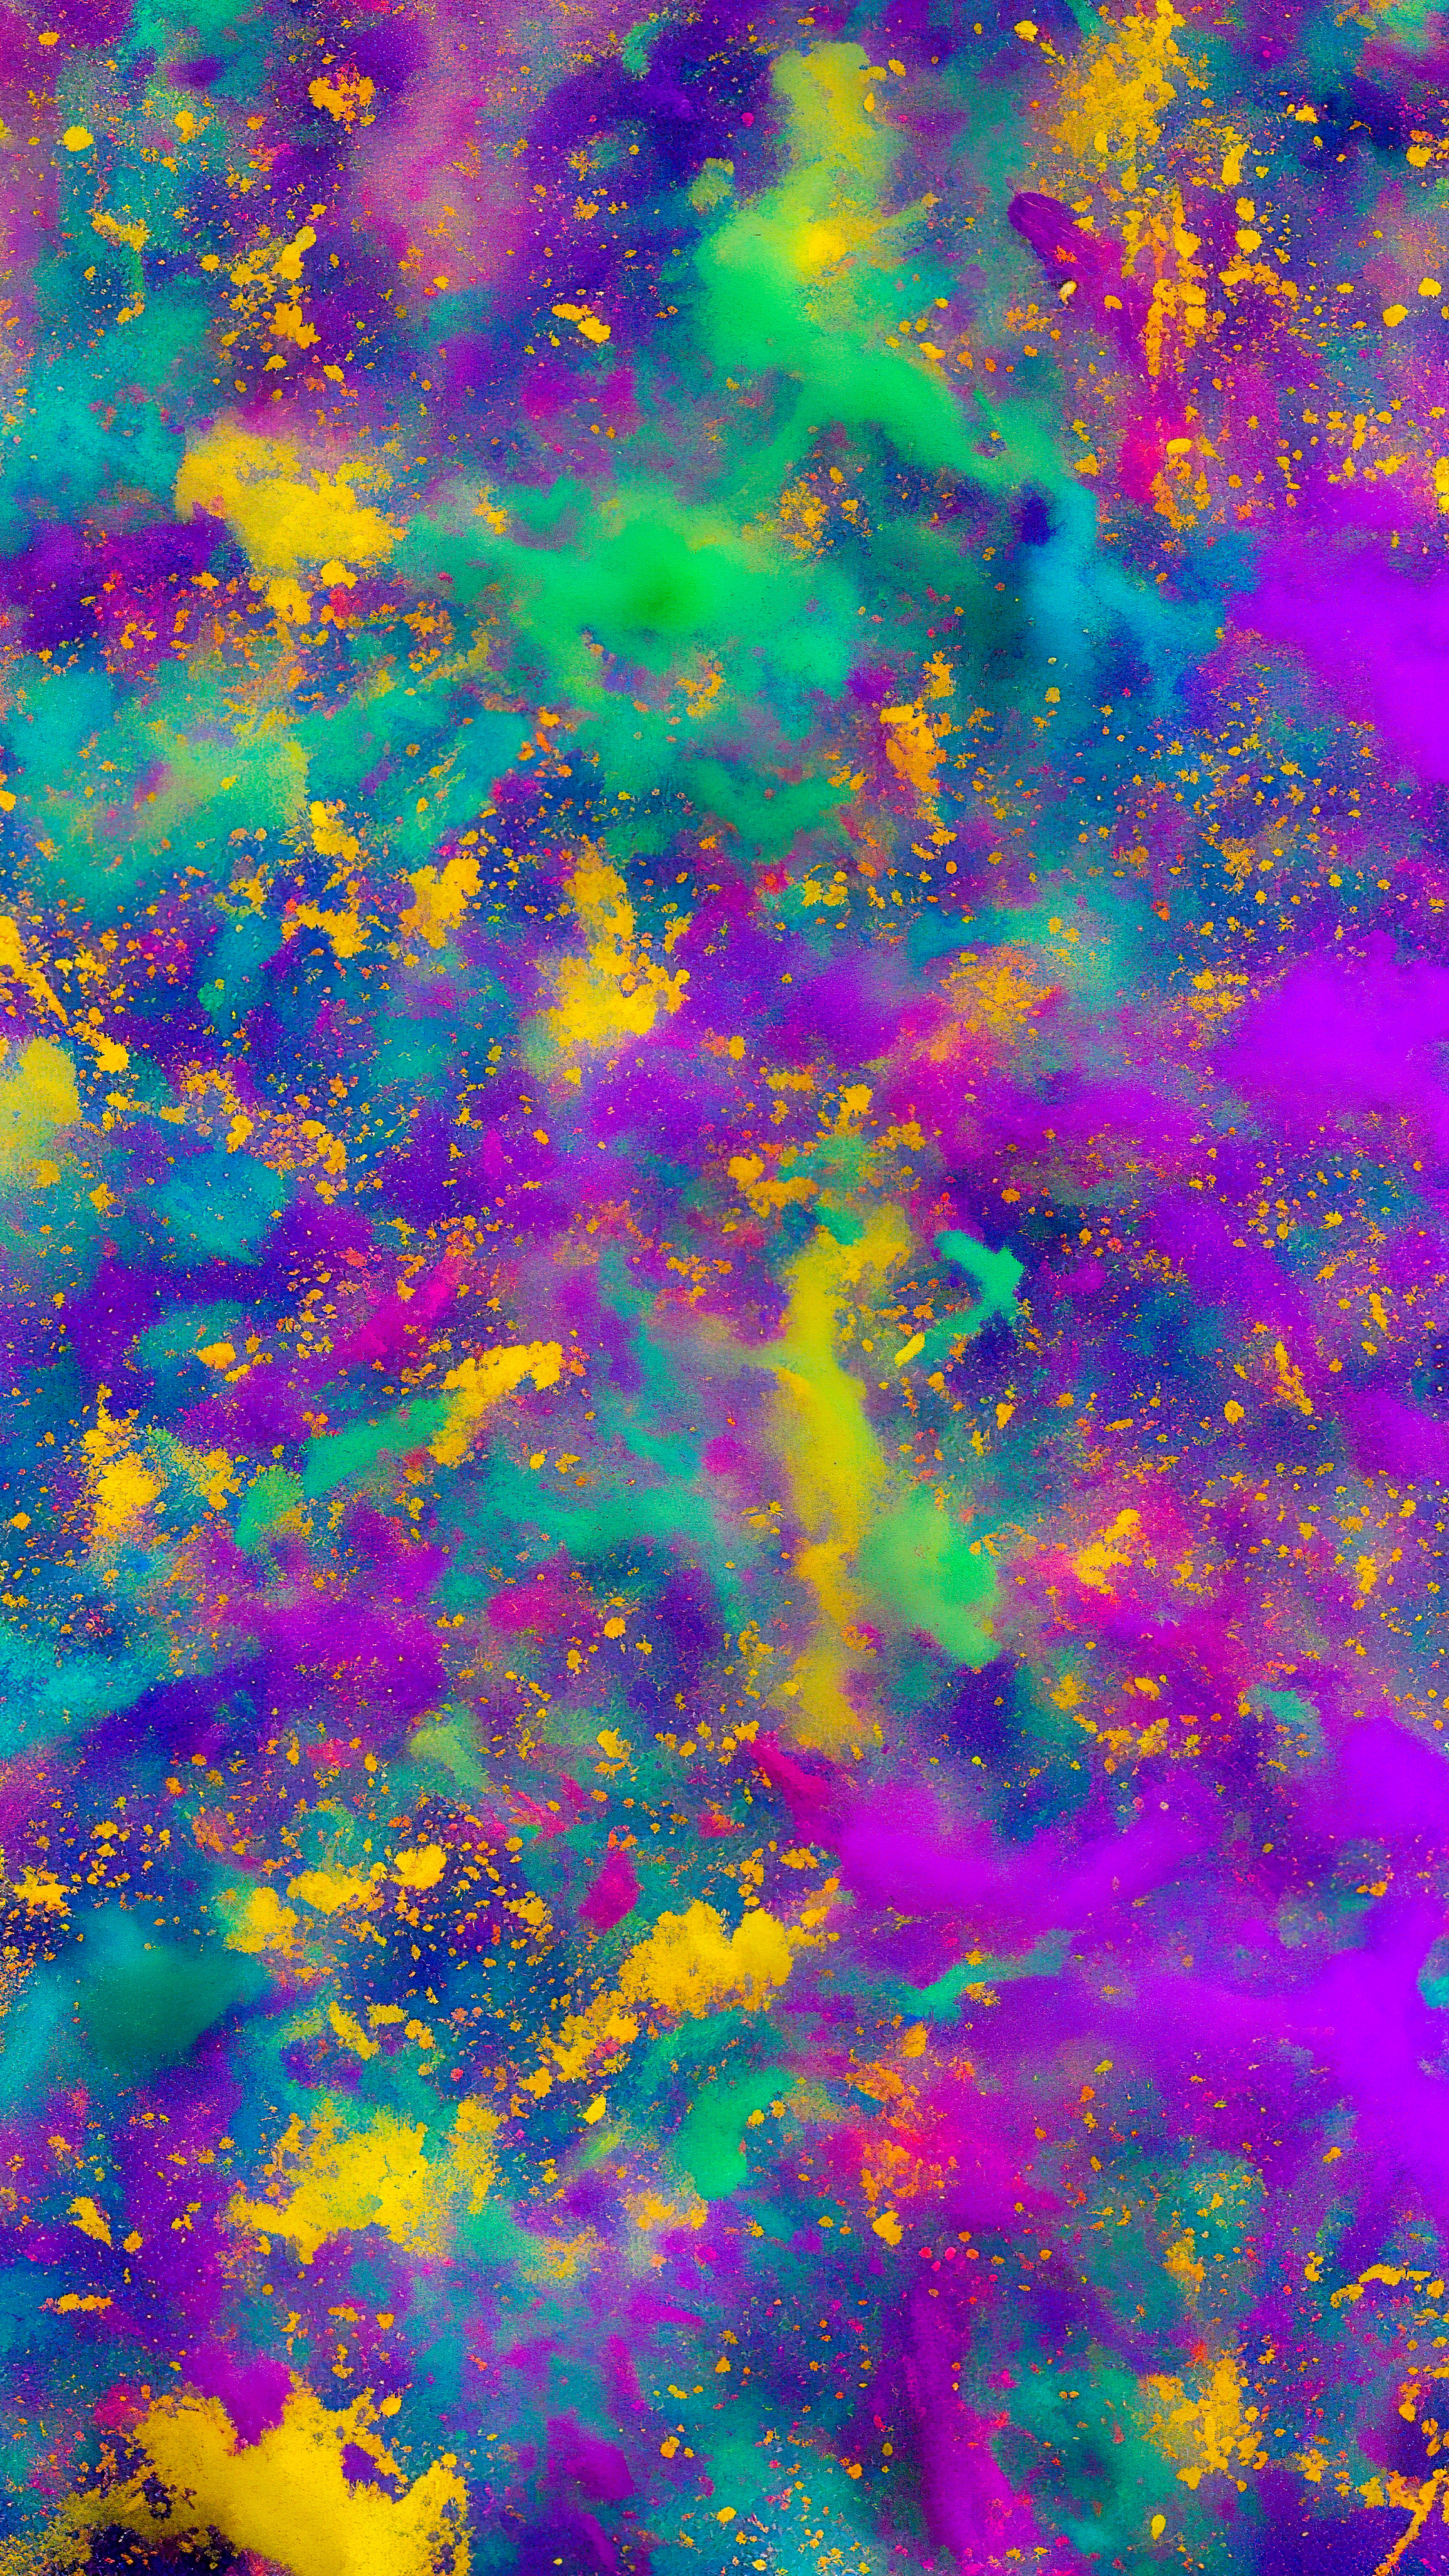 Get lost in the magic of our iPhone background in 4K, capturing an abstract explosion of colored powder in hues of yellow, red, purple, and green, mid-air.